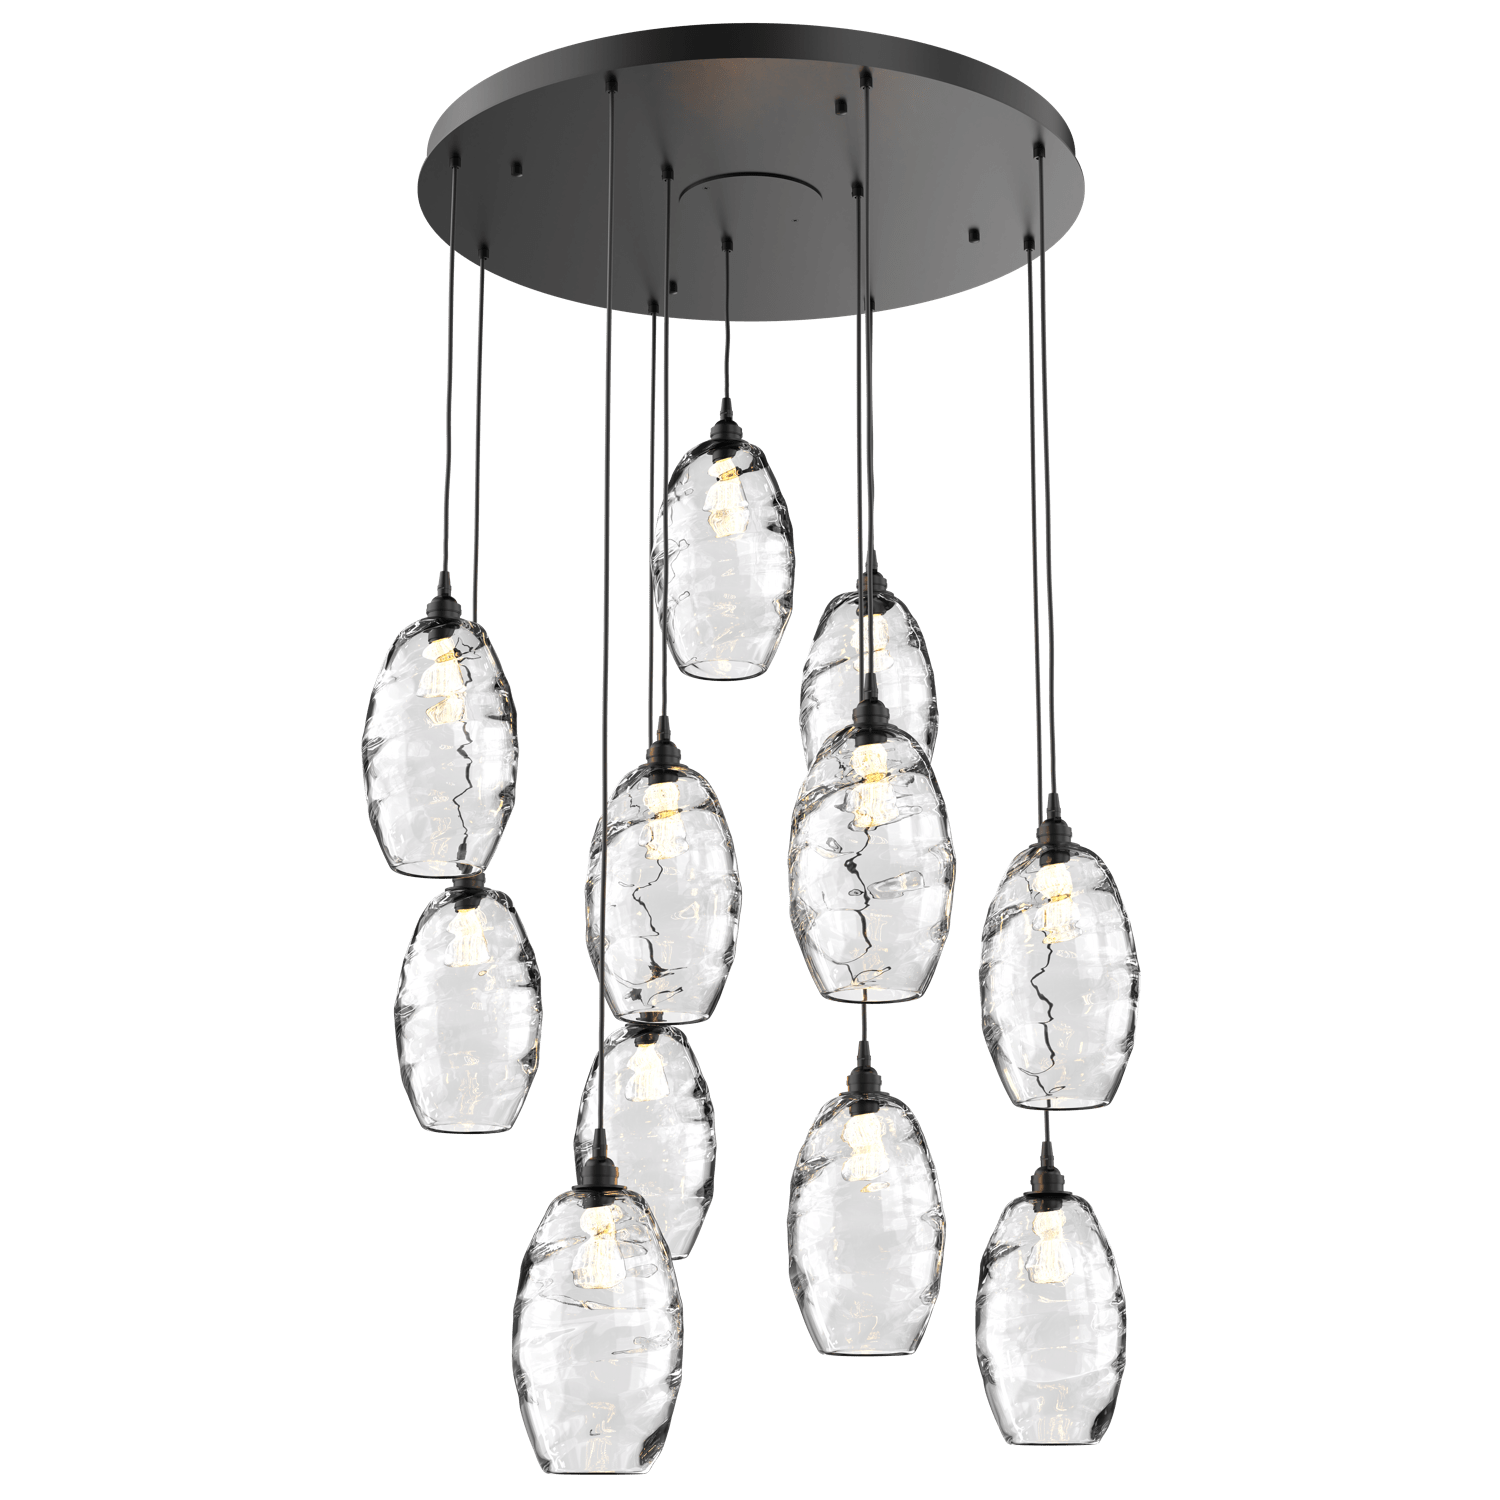 CHB0035-11-MB-OC-Hammerton-Studio-Optic-Blown-Glass-Elisse-11-light-round-pendant-chandelier-with-matte-black-finish-and-optic-clear-blown-glass-shades-and-incandescent-lamping